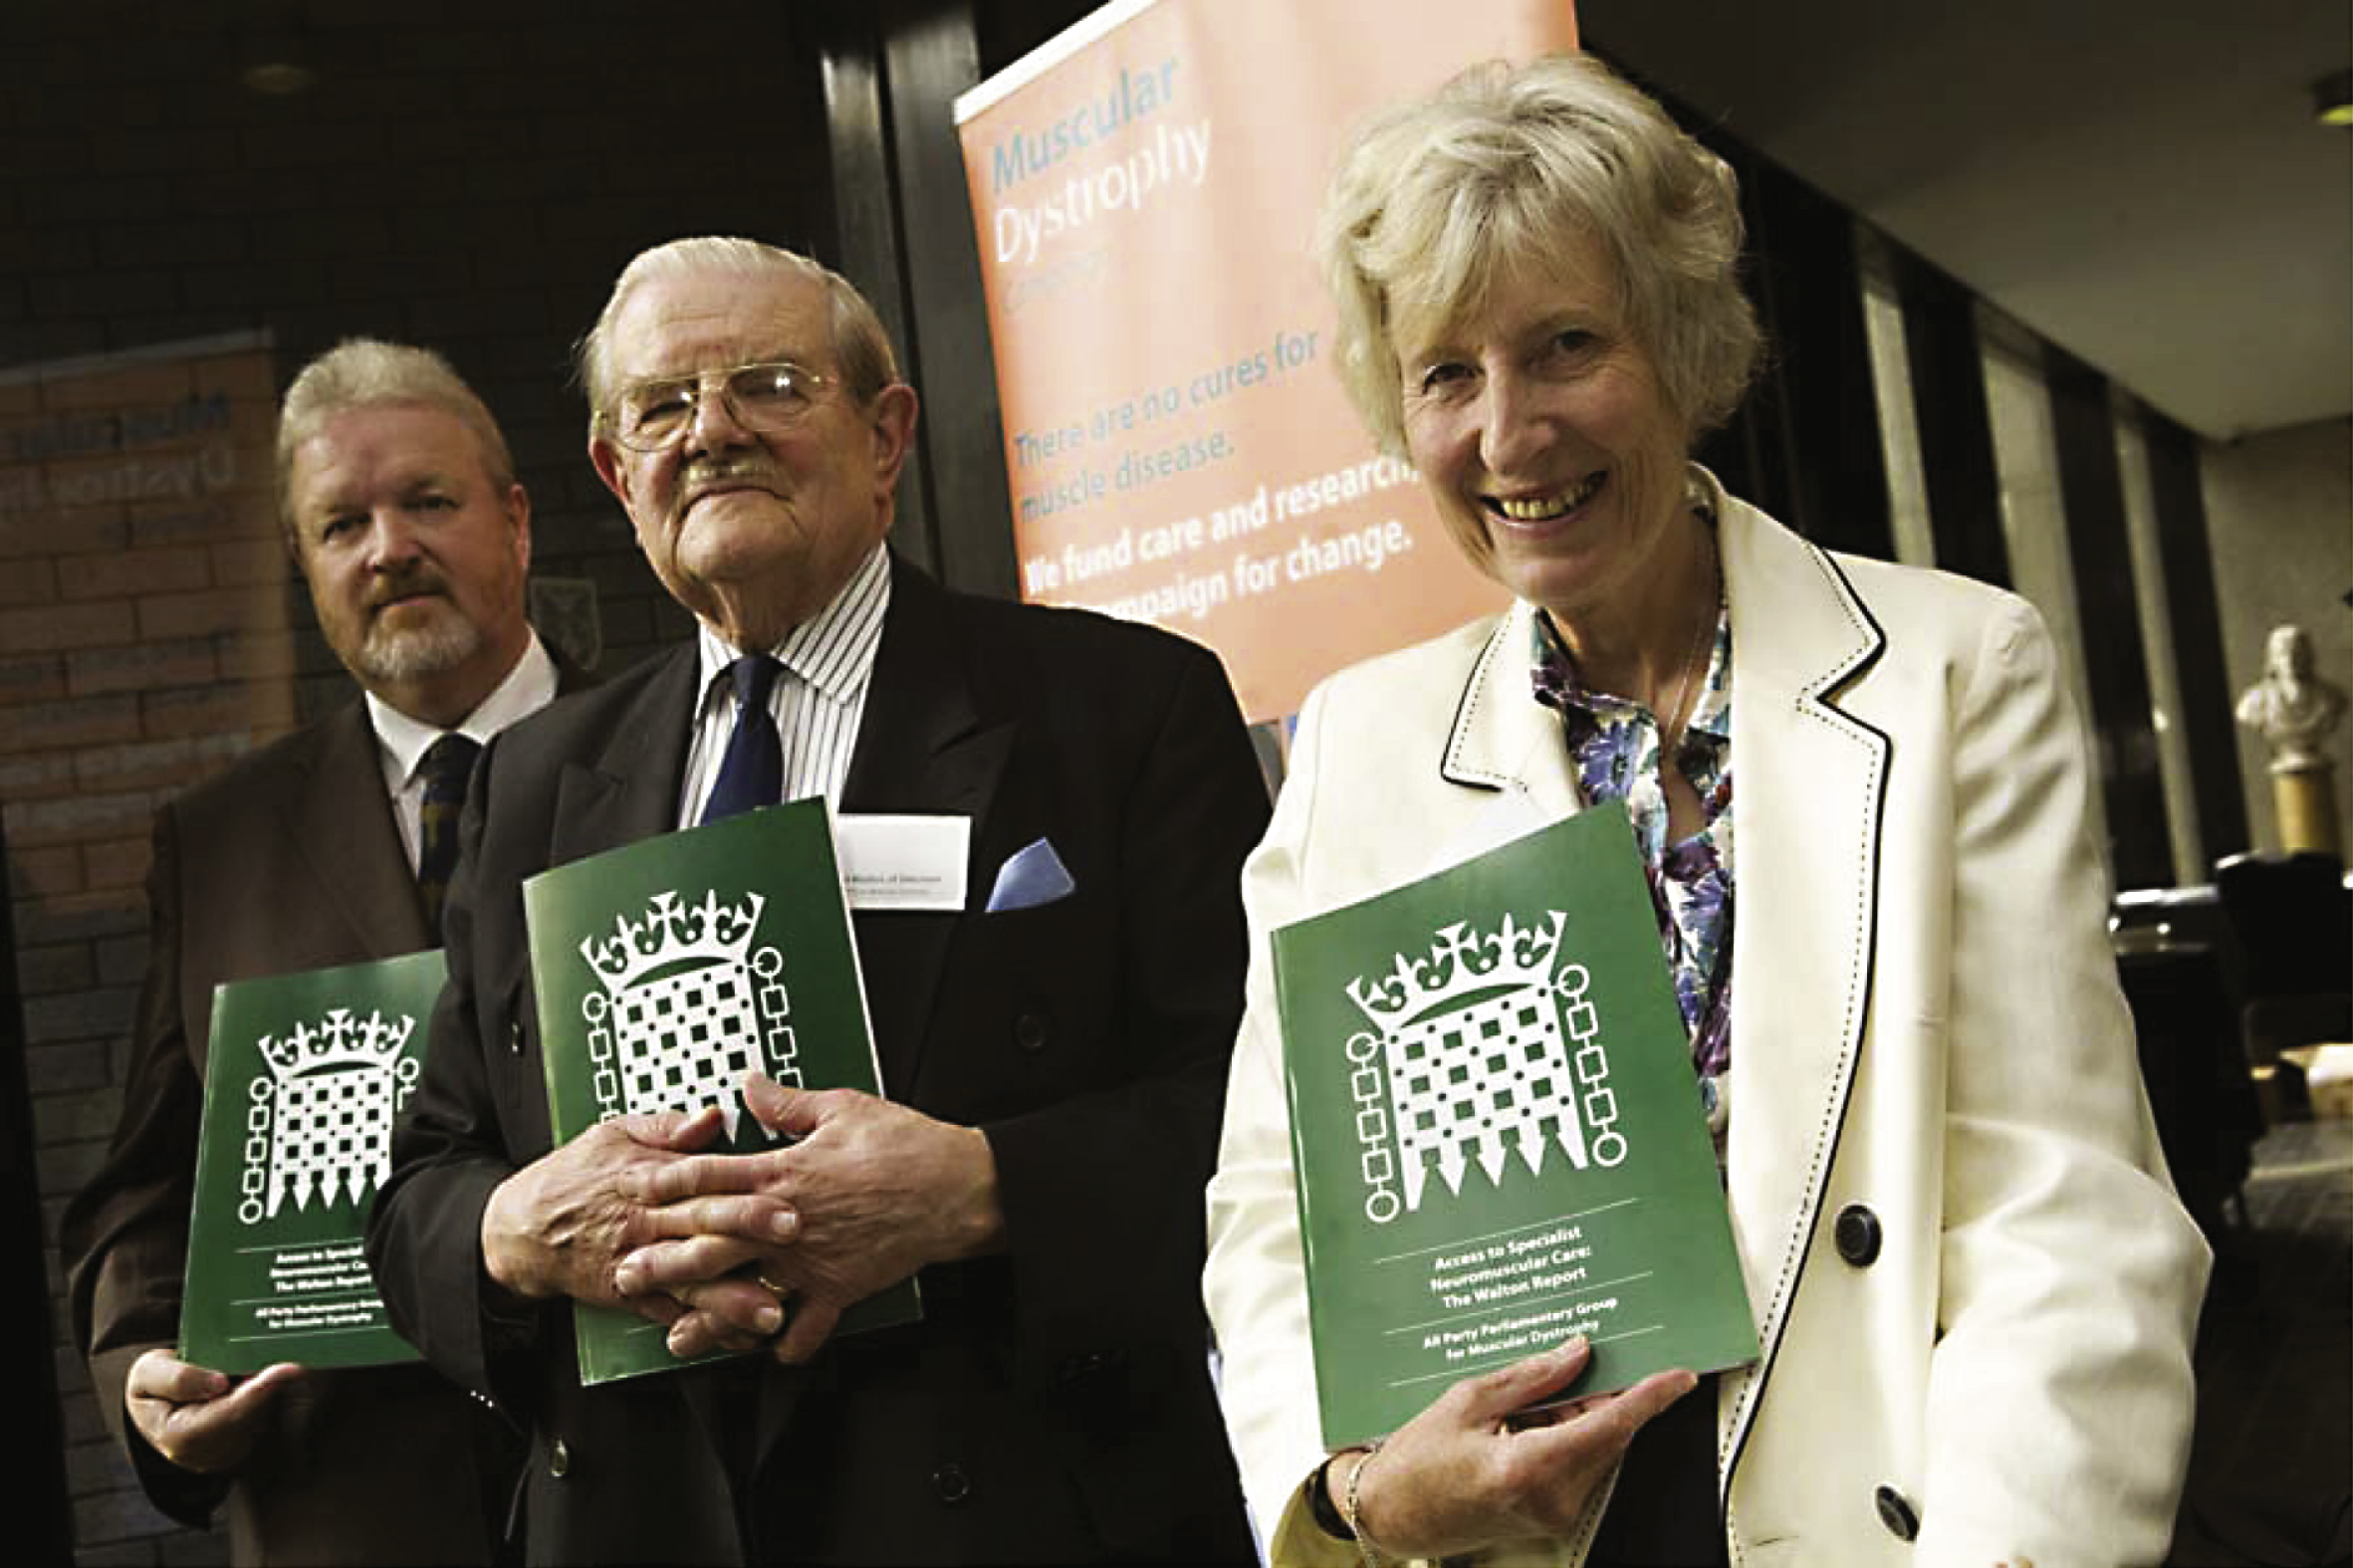 Launching the Walton Report on 24 August 2009 – Dave Anderson Member of Parliament (Chair of All Party Parliamentary Group), John Walton and Baroness Celia Thomas (Vice Chair).